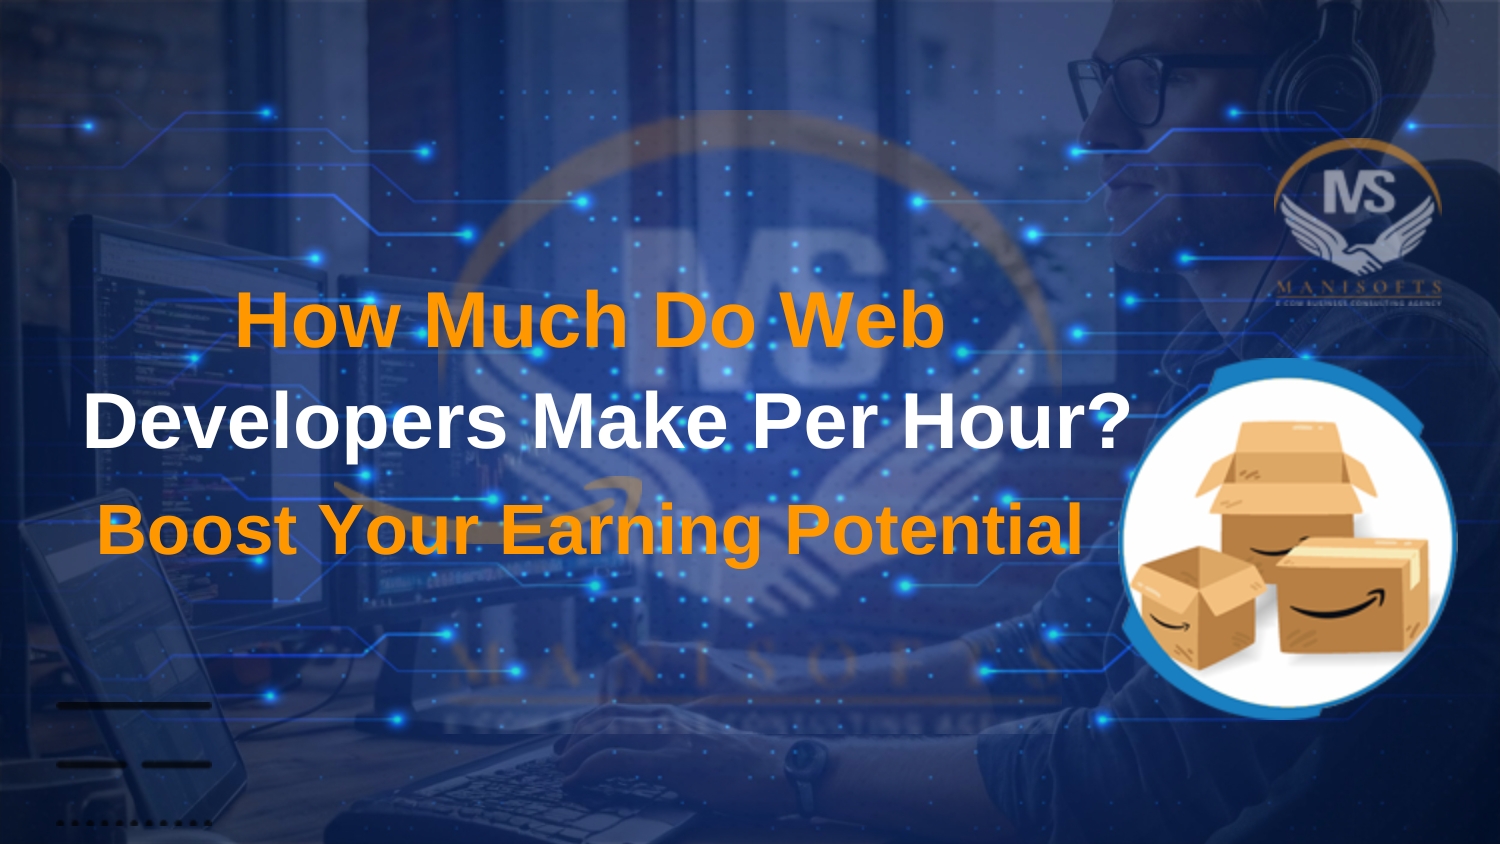 How Much Do Web Developers Make Per Hour